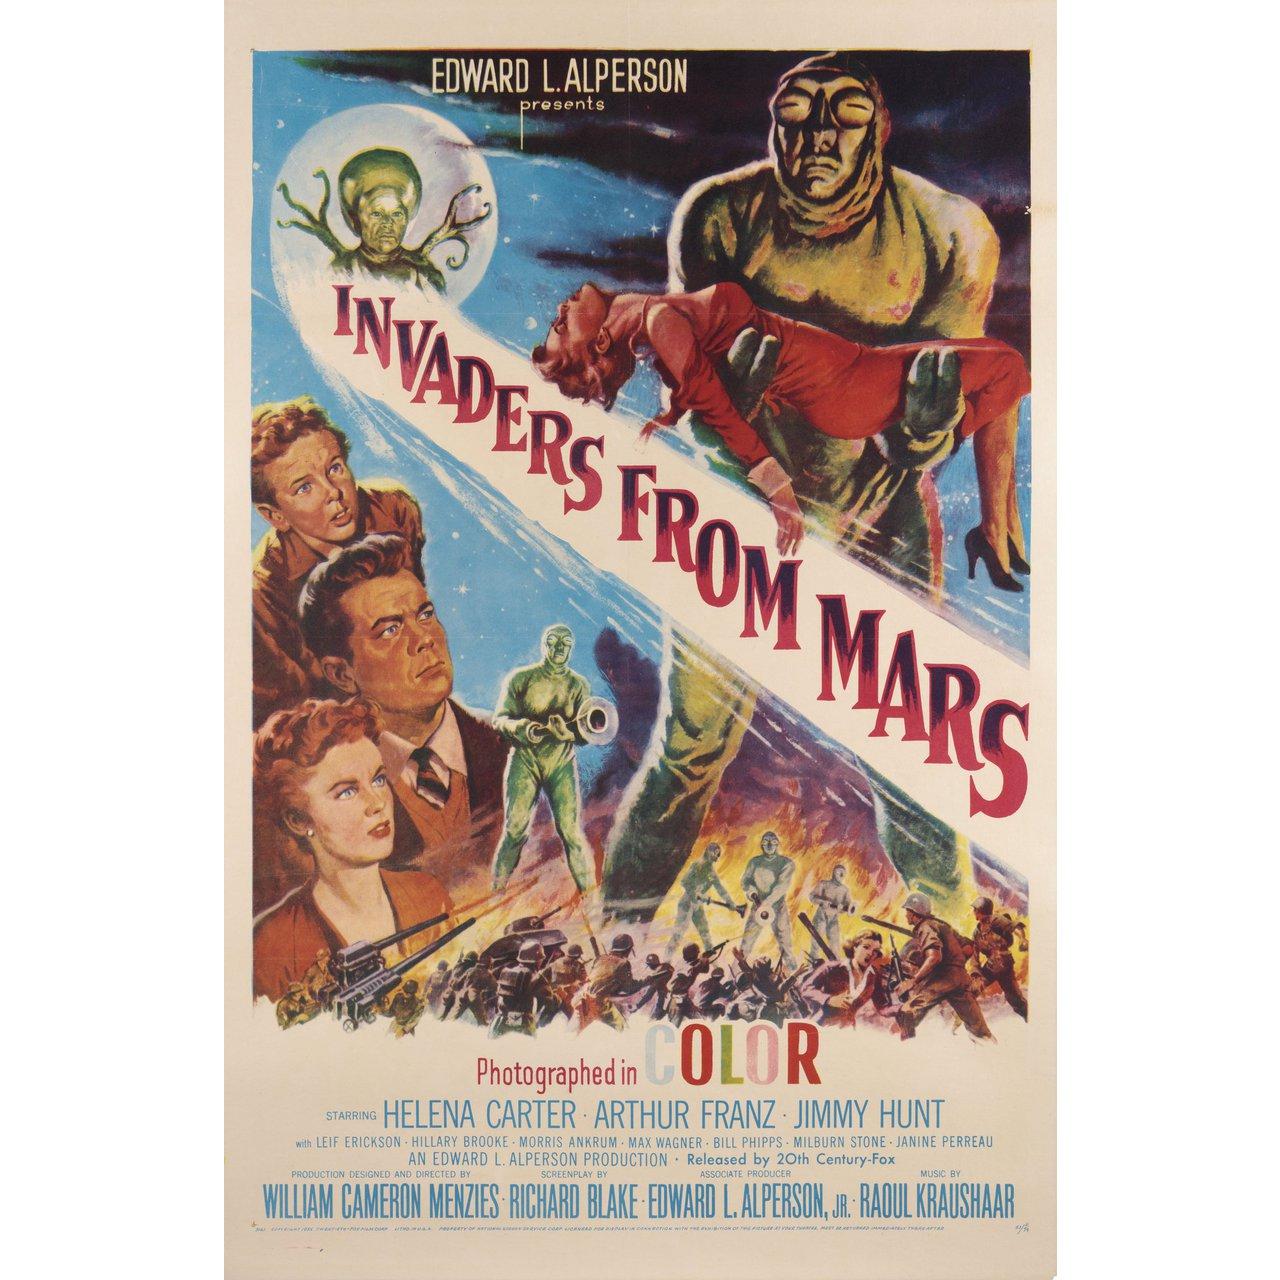 Original 1955 re-release U.S. one sheet poster for the film Invaders from Mars directed by William Cameron Menzies with Helena Carter / Arthur Franz / Jimmy Hunt / Leif Erickson. Fine condition, folded. Many original posters were issued folded or